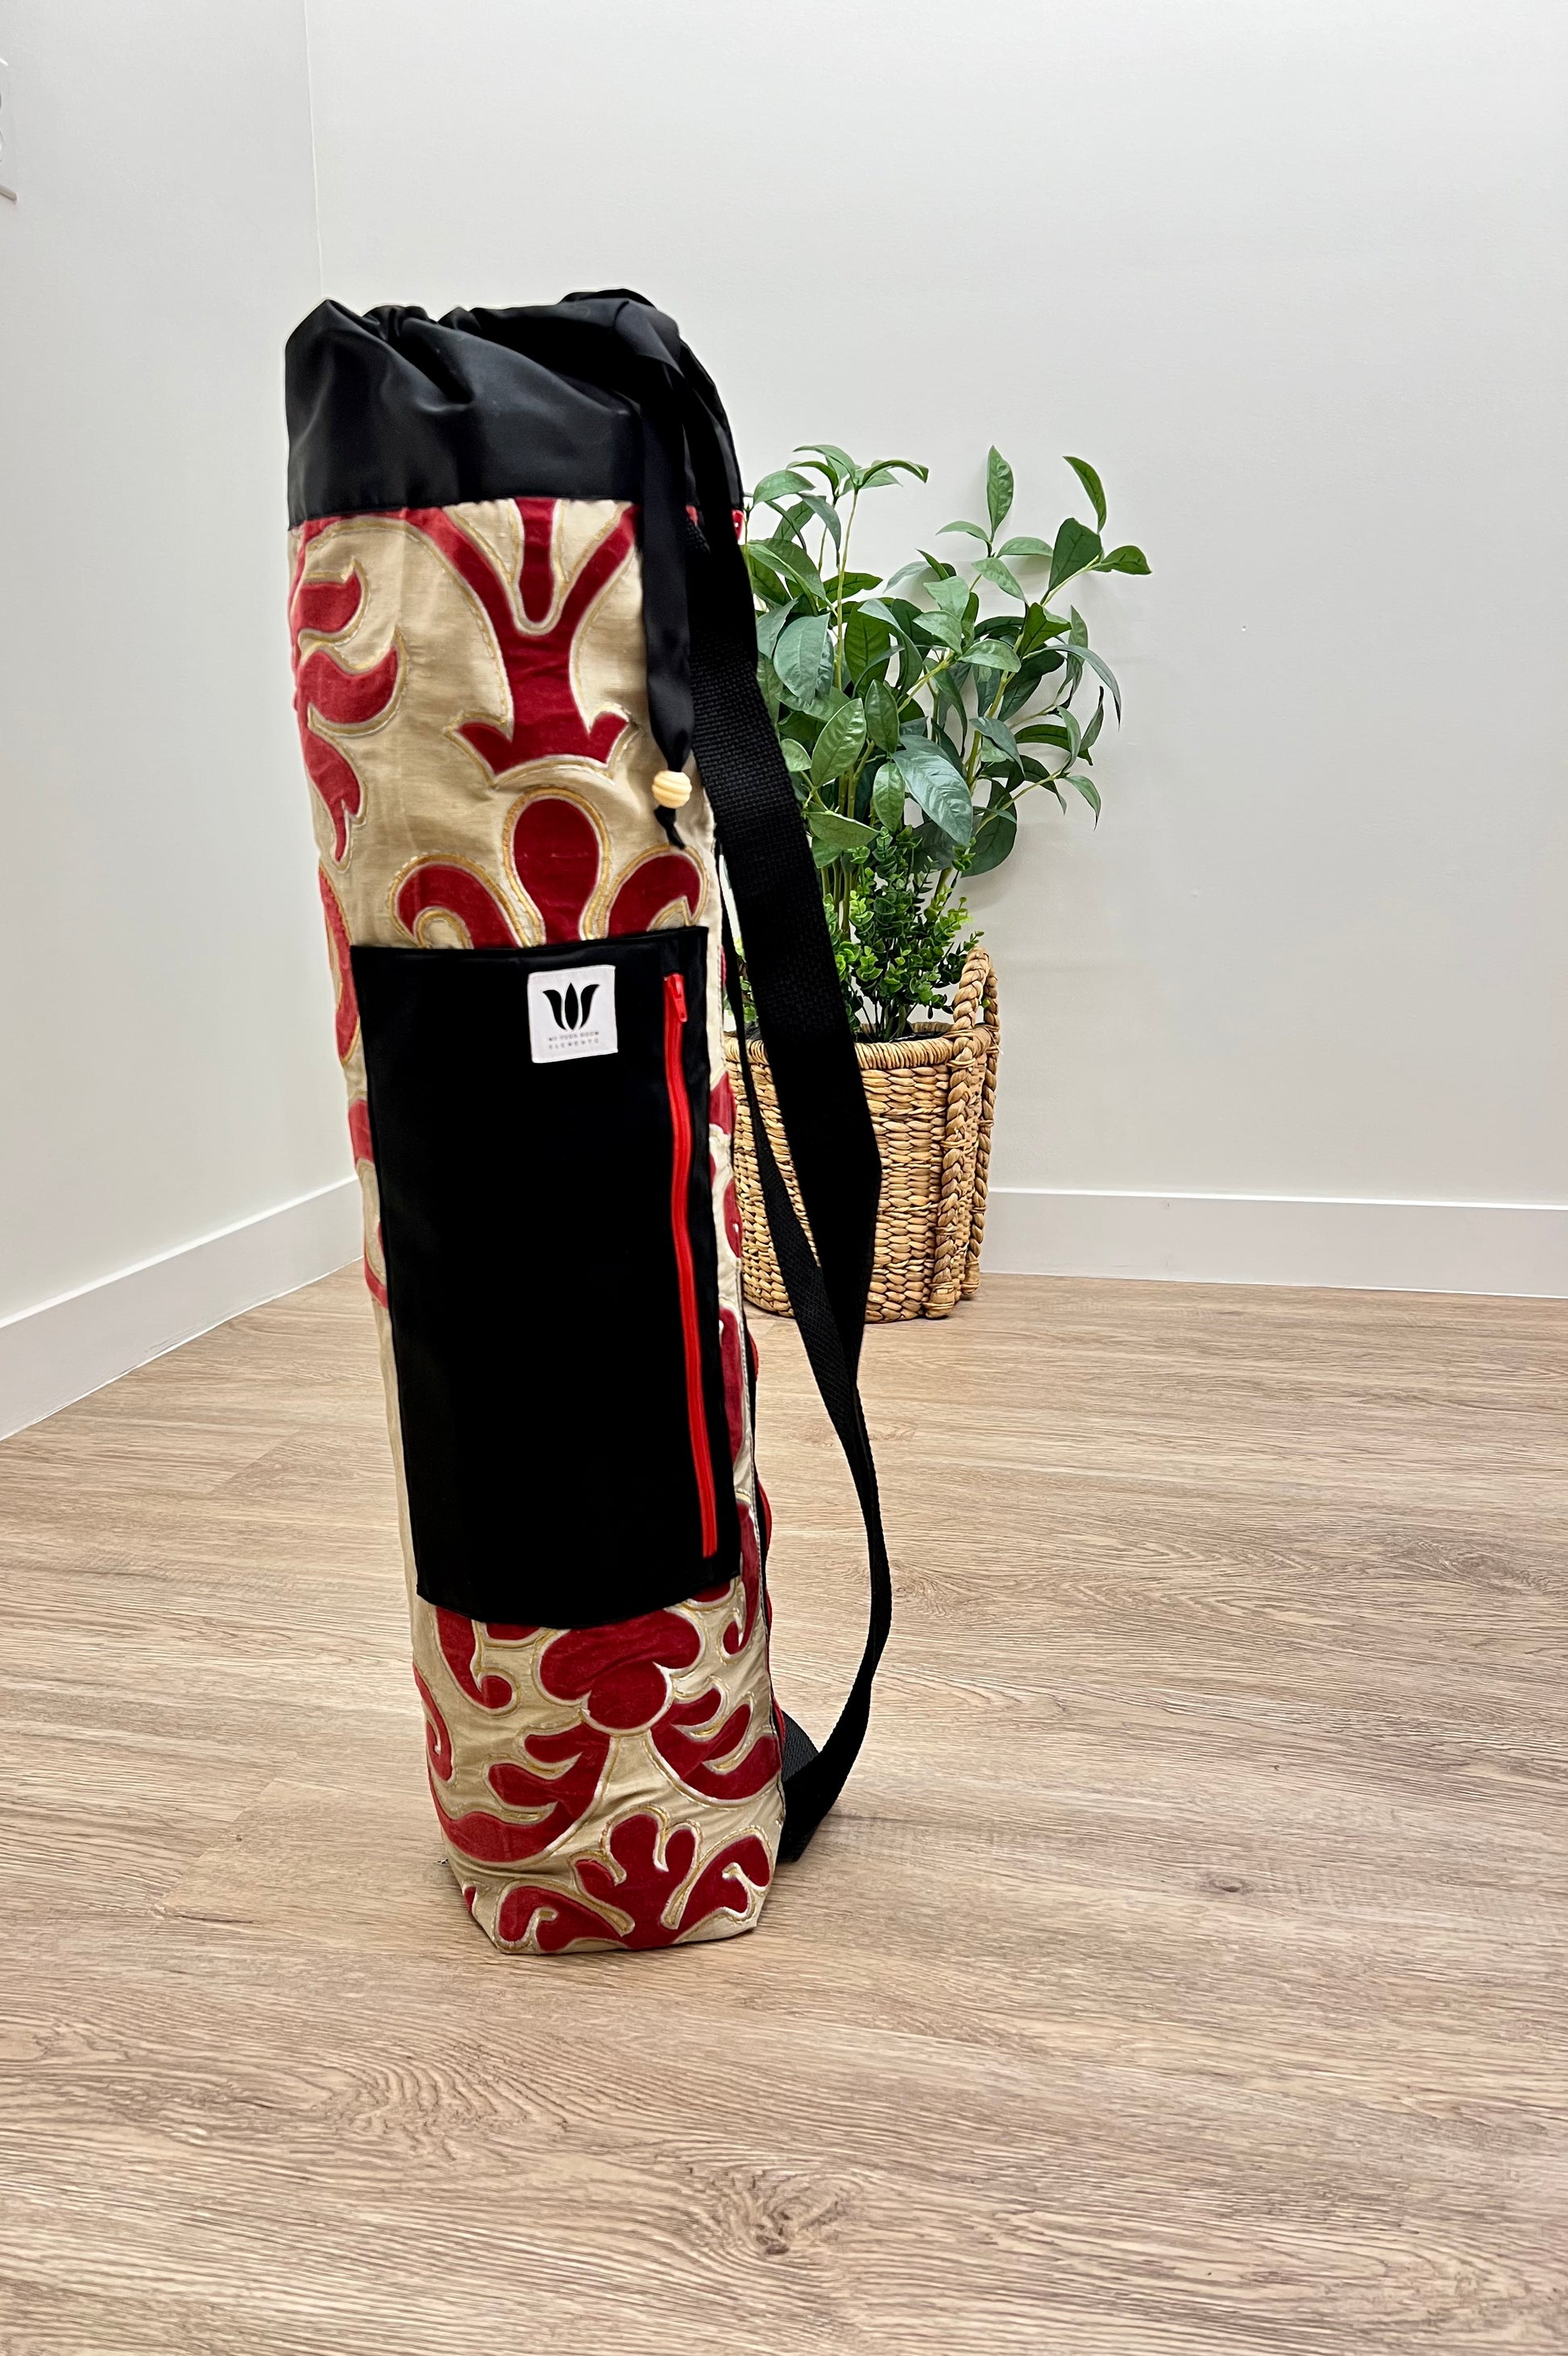 Yoga Mat Bag, Backpack Option in Red and Gold Scroll embroidery print handcrafted by My Yoga Room Elements in their Canadian Studio holds wider yoga mat bags